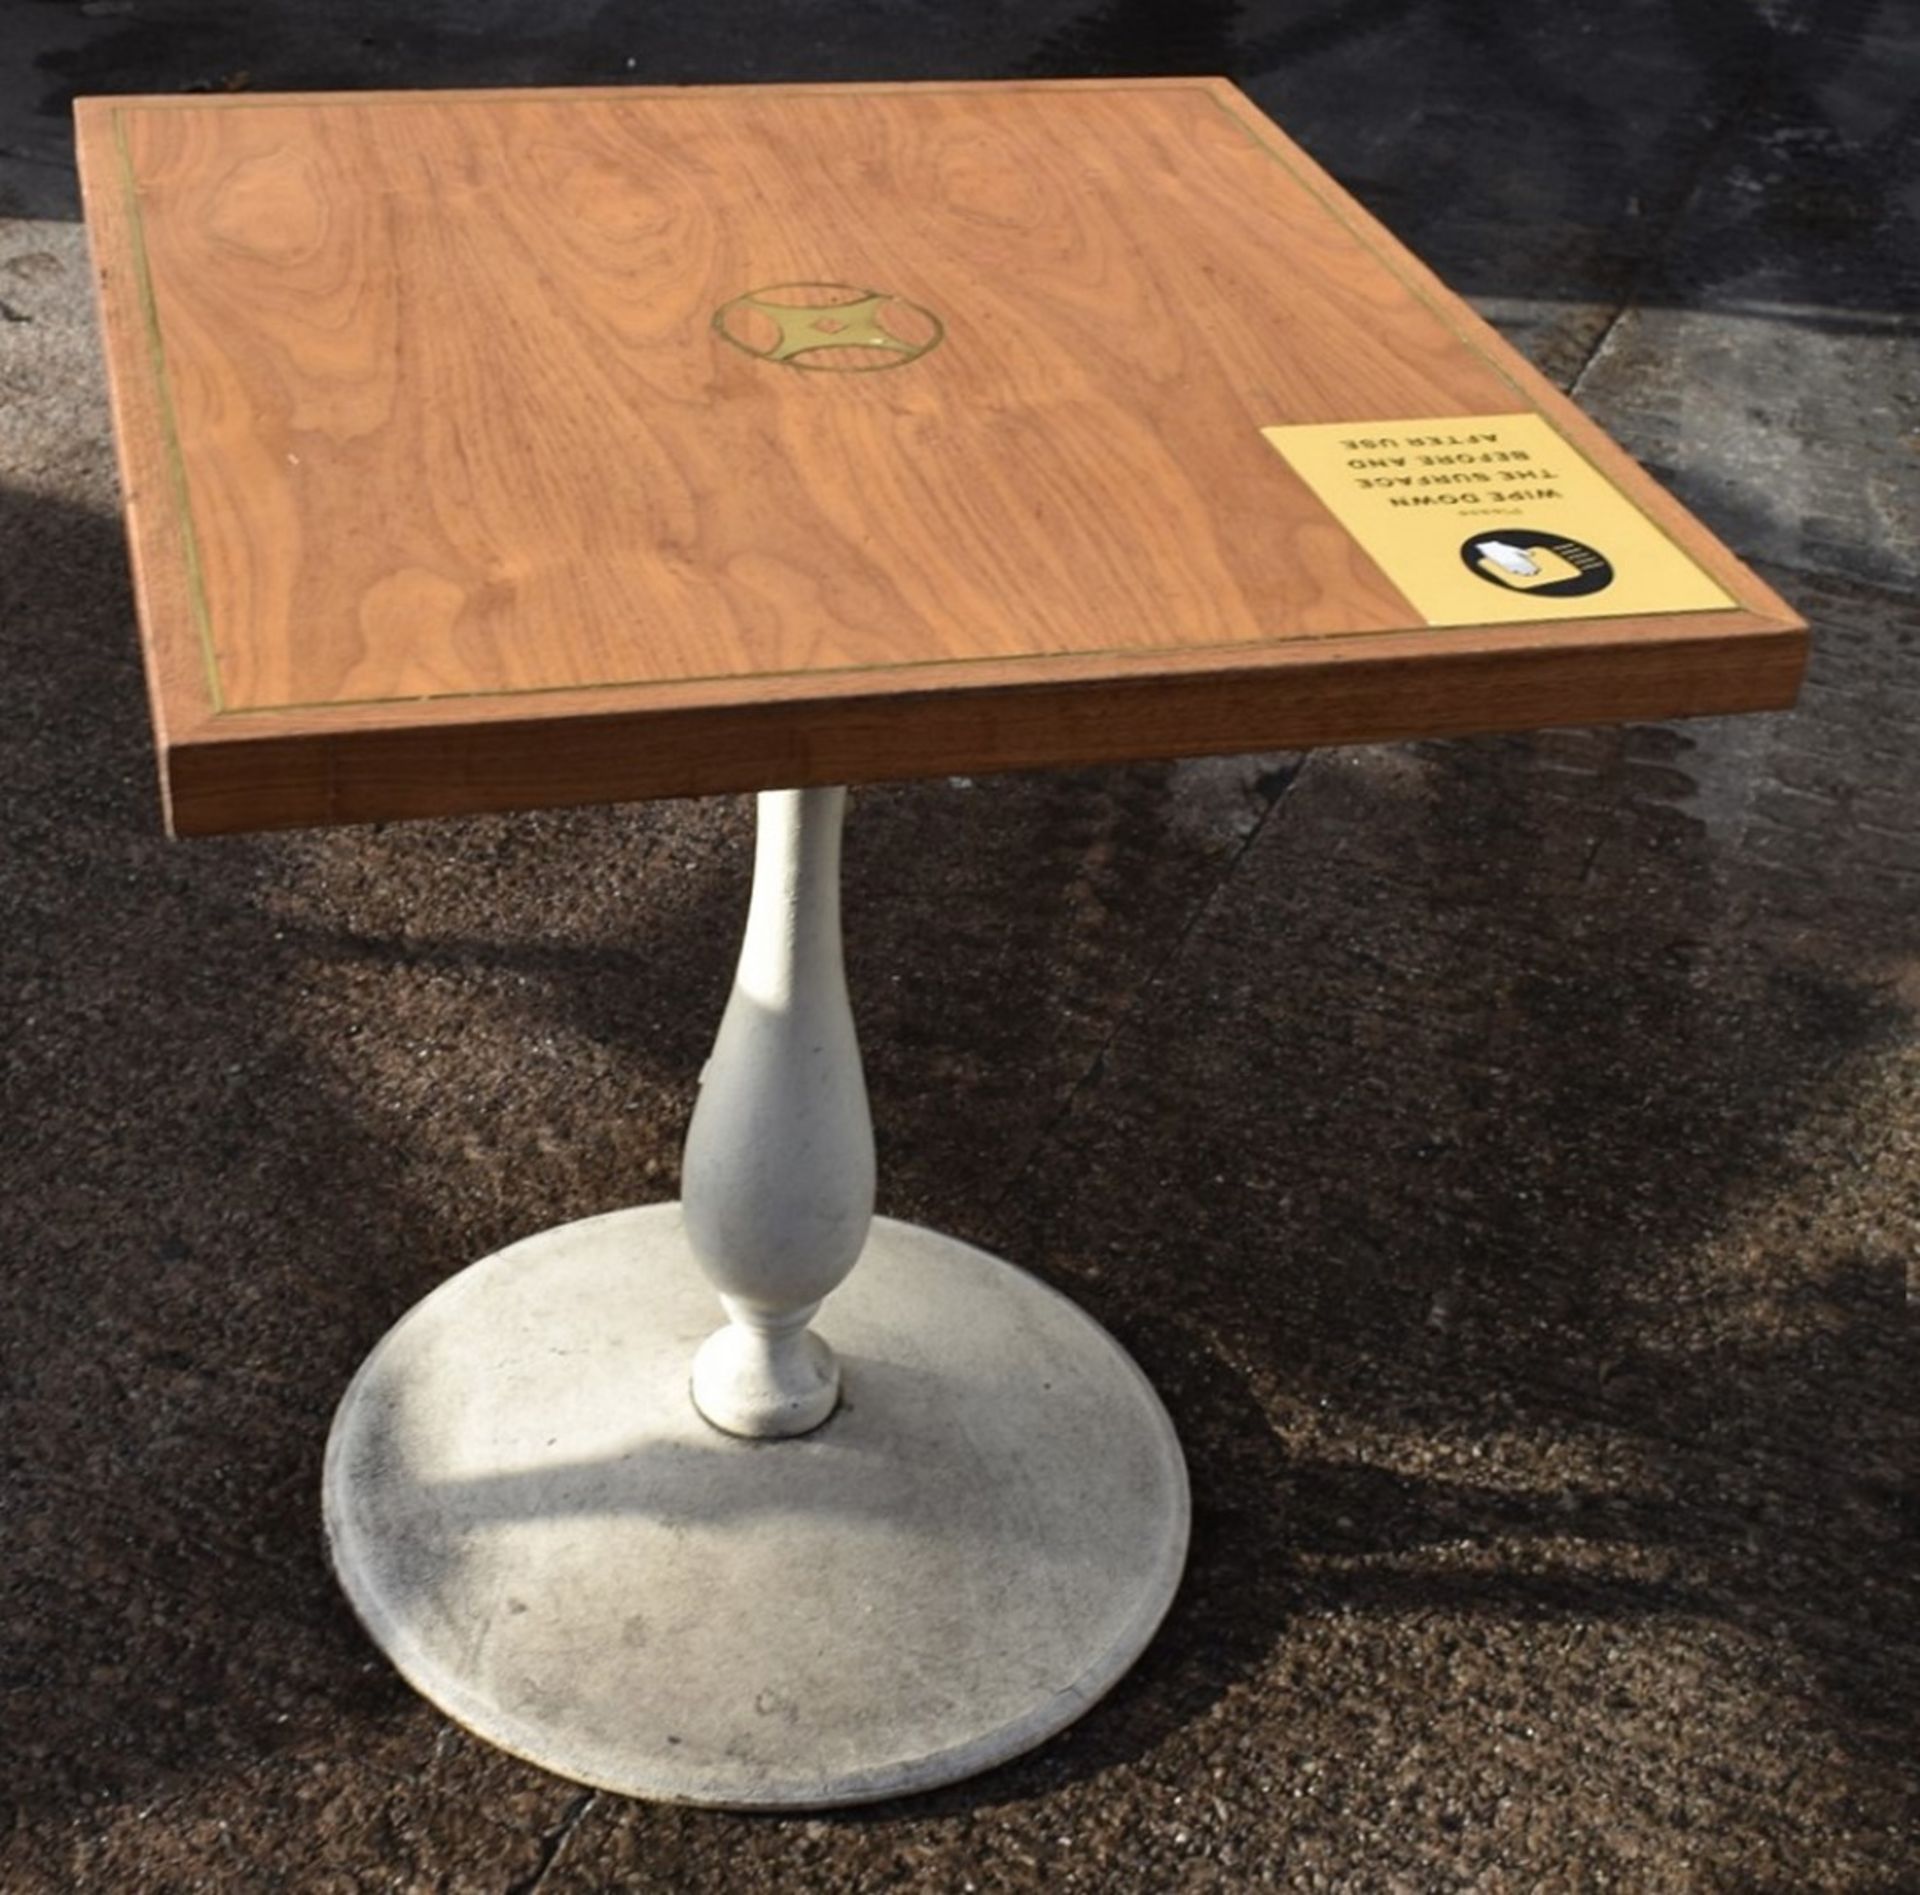 4 x Wooden Topped Bistro Tables Featuring Inlaid Brass Work And Sturdy Metal Bases - Image 3 of 7